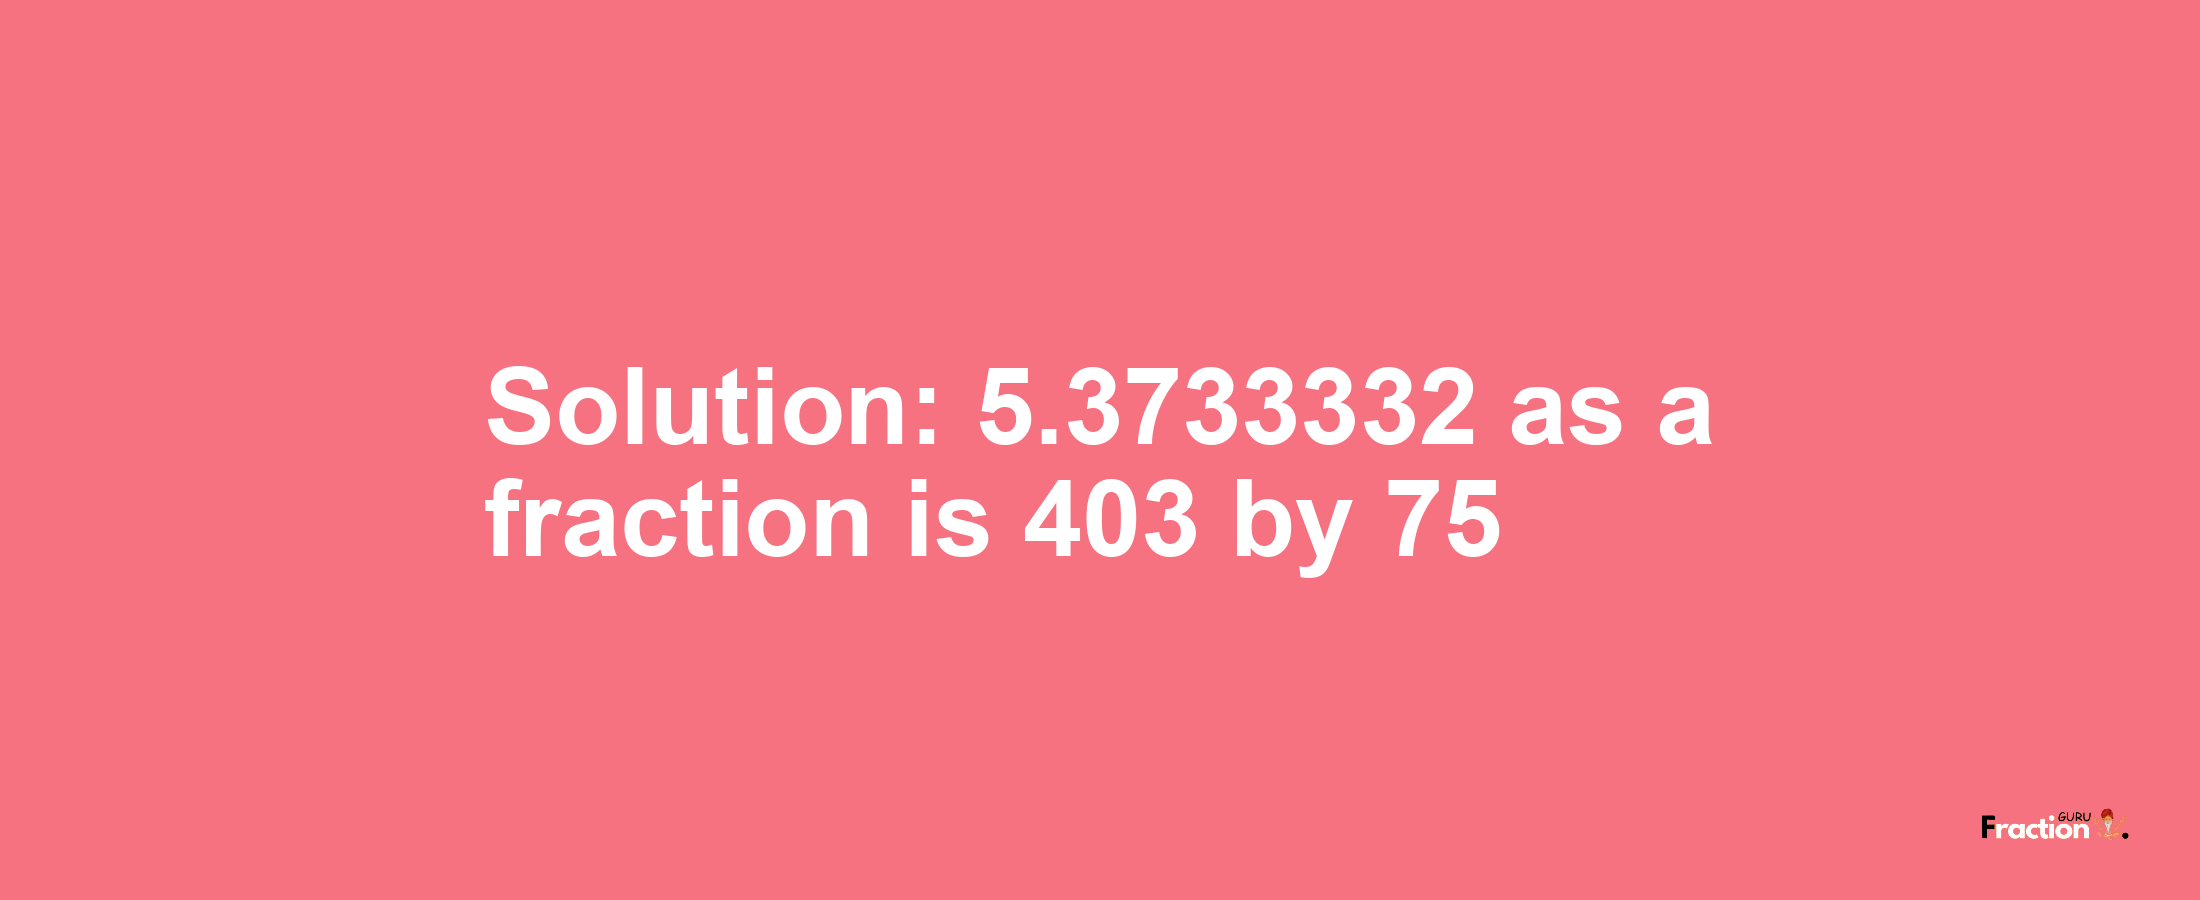 Solution:5.3733332 as a fraction is 403/75